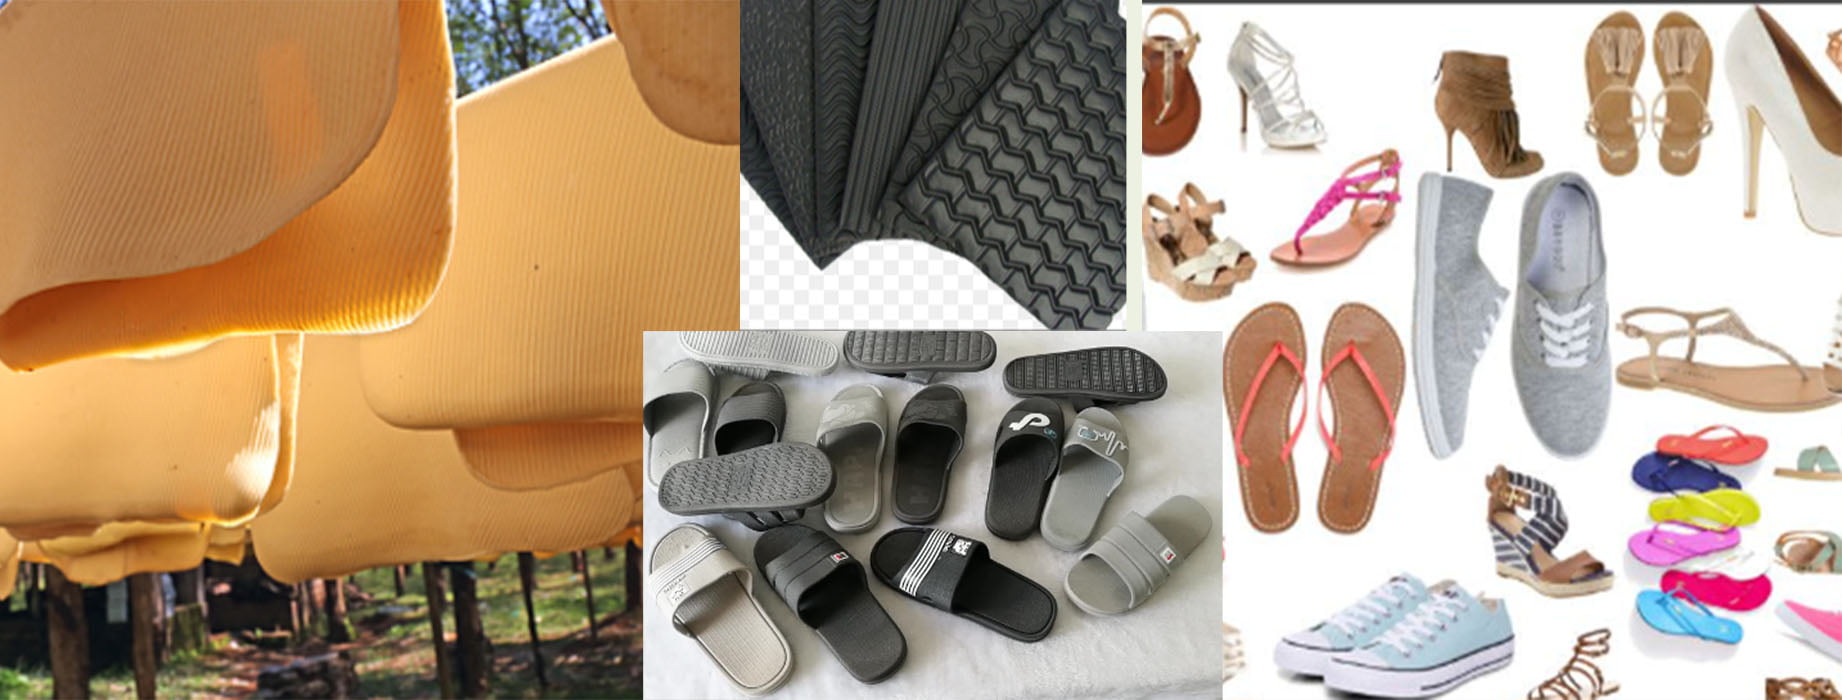 Shoes, #sandals #slippers, #An assortment of stylish and practical footwear accessories, including shoe laces, insoles, shoe trees, and shoe polish, neatly arranged on a white background.